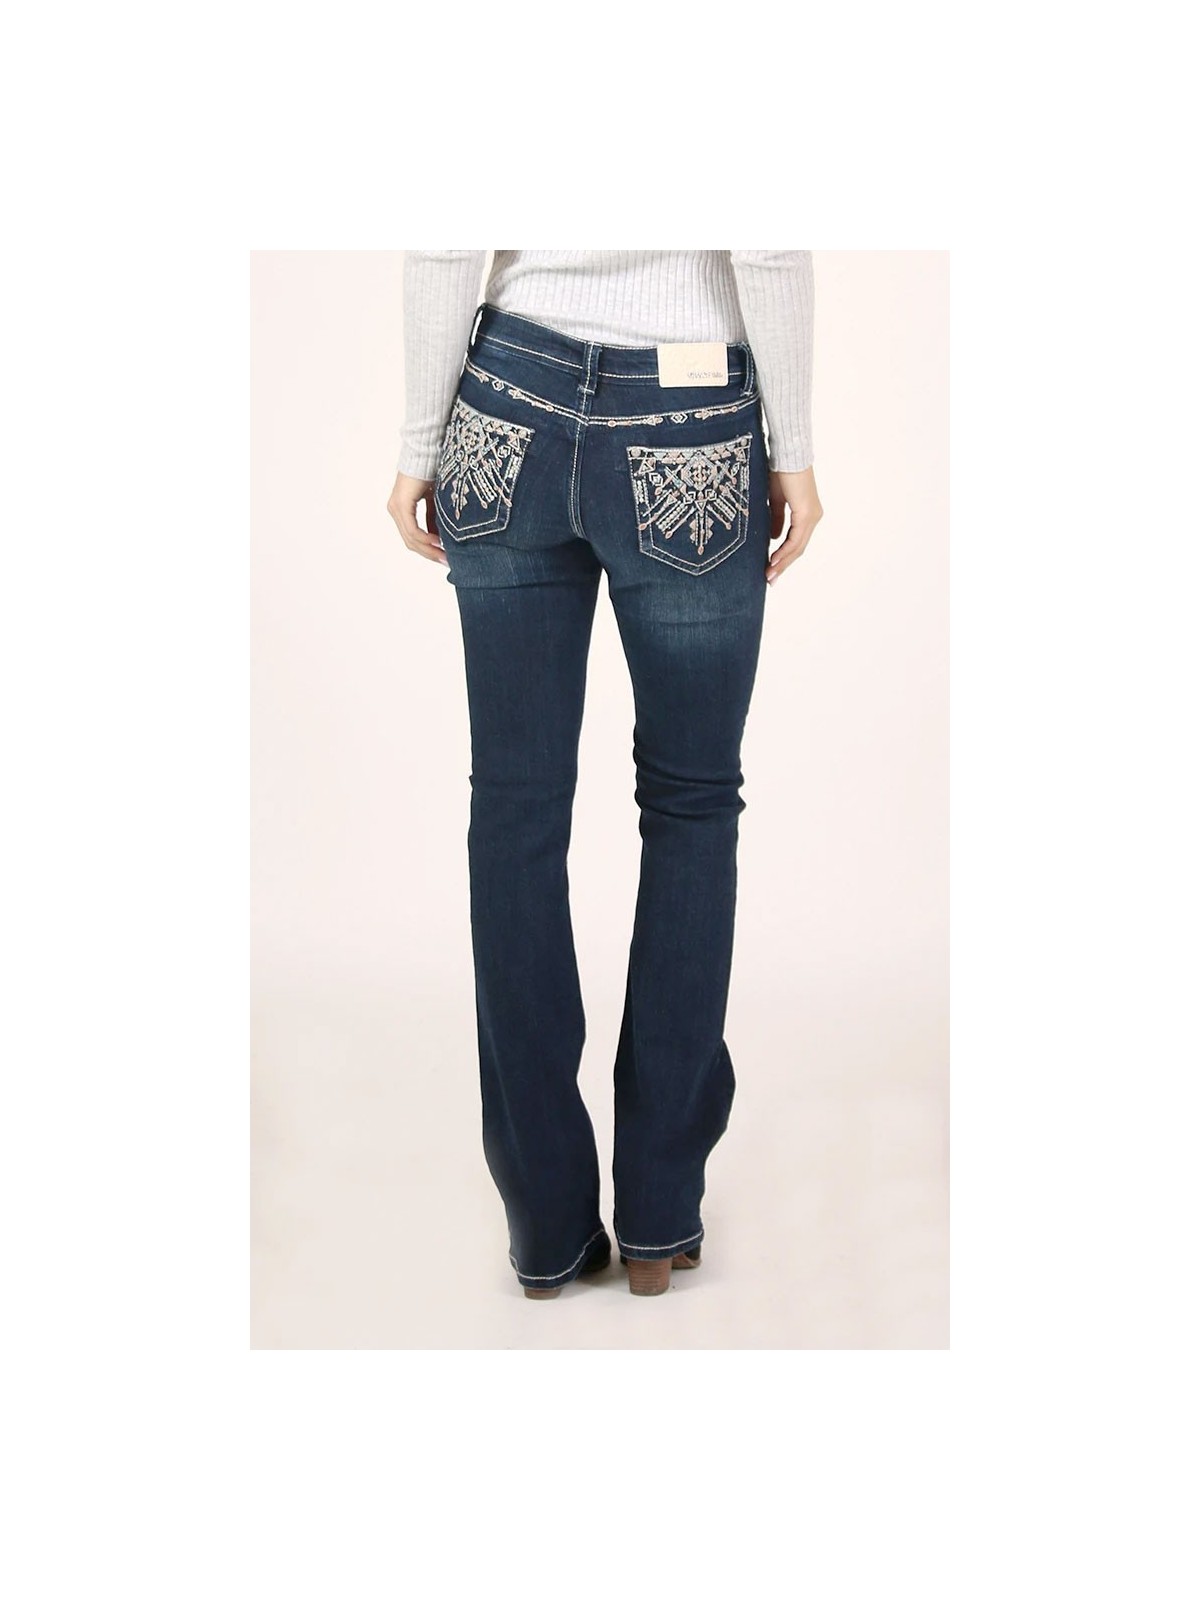 Aztec Embroidered Bootcut Jeans